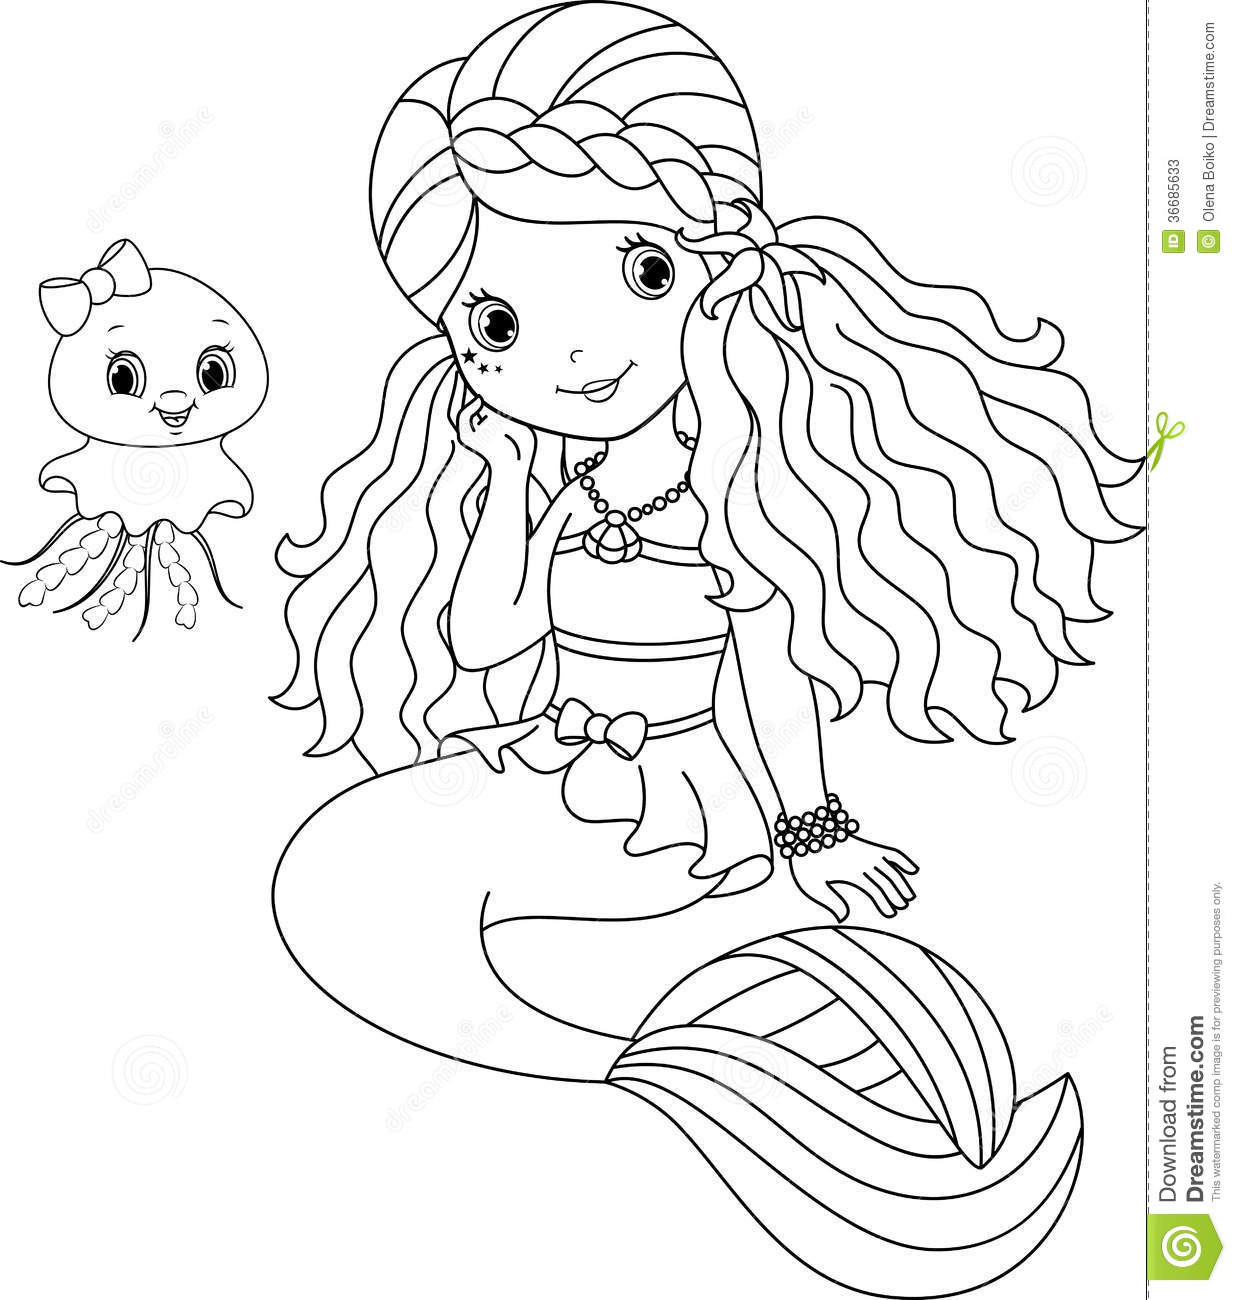 Mermaid Coloring Pages Kids
 Mermaid coloring page stock vector Illustration of